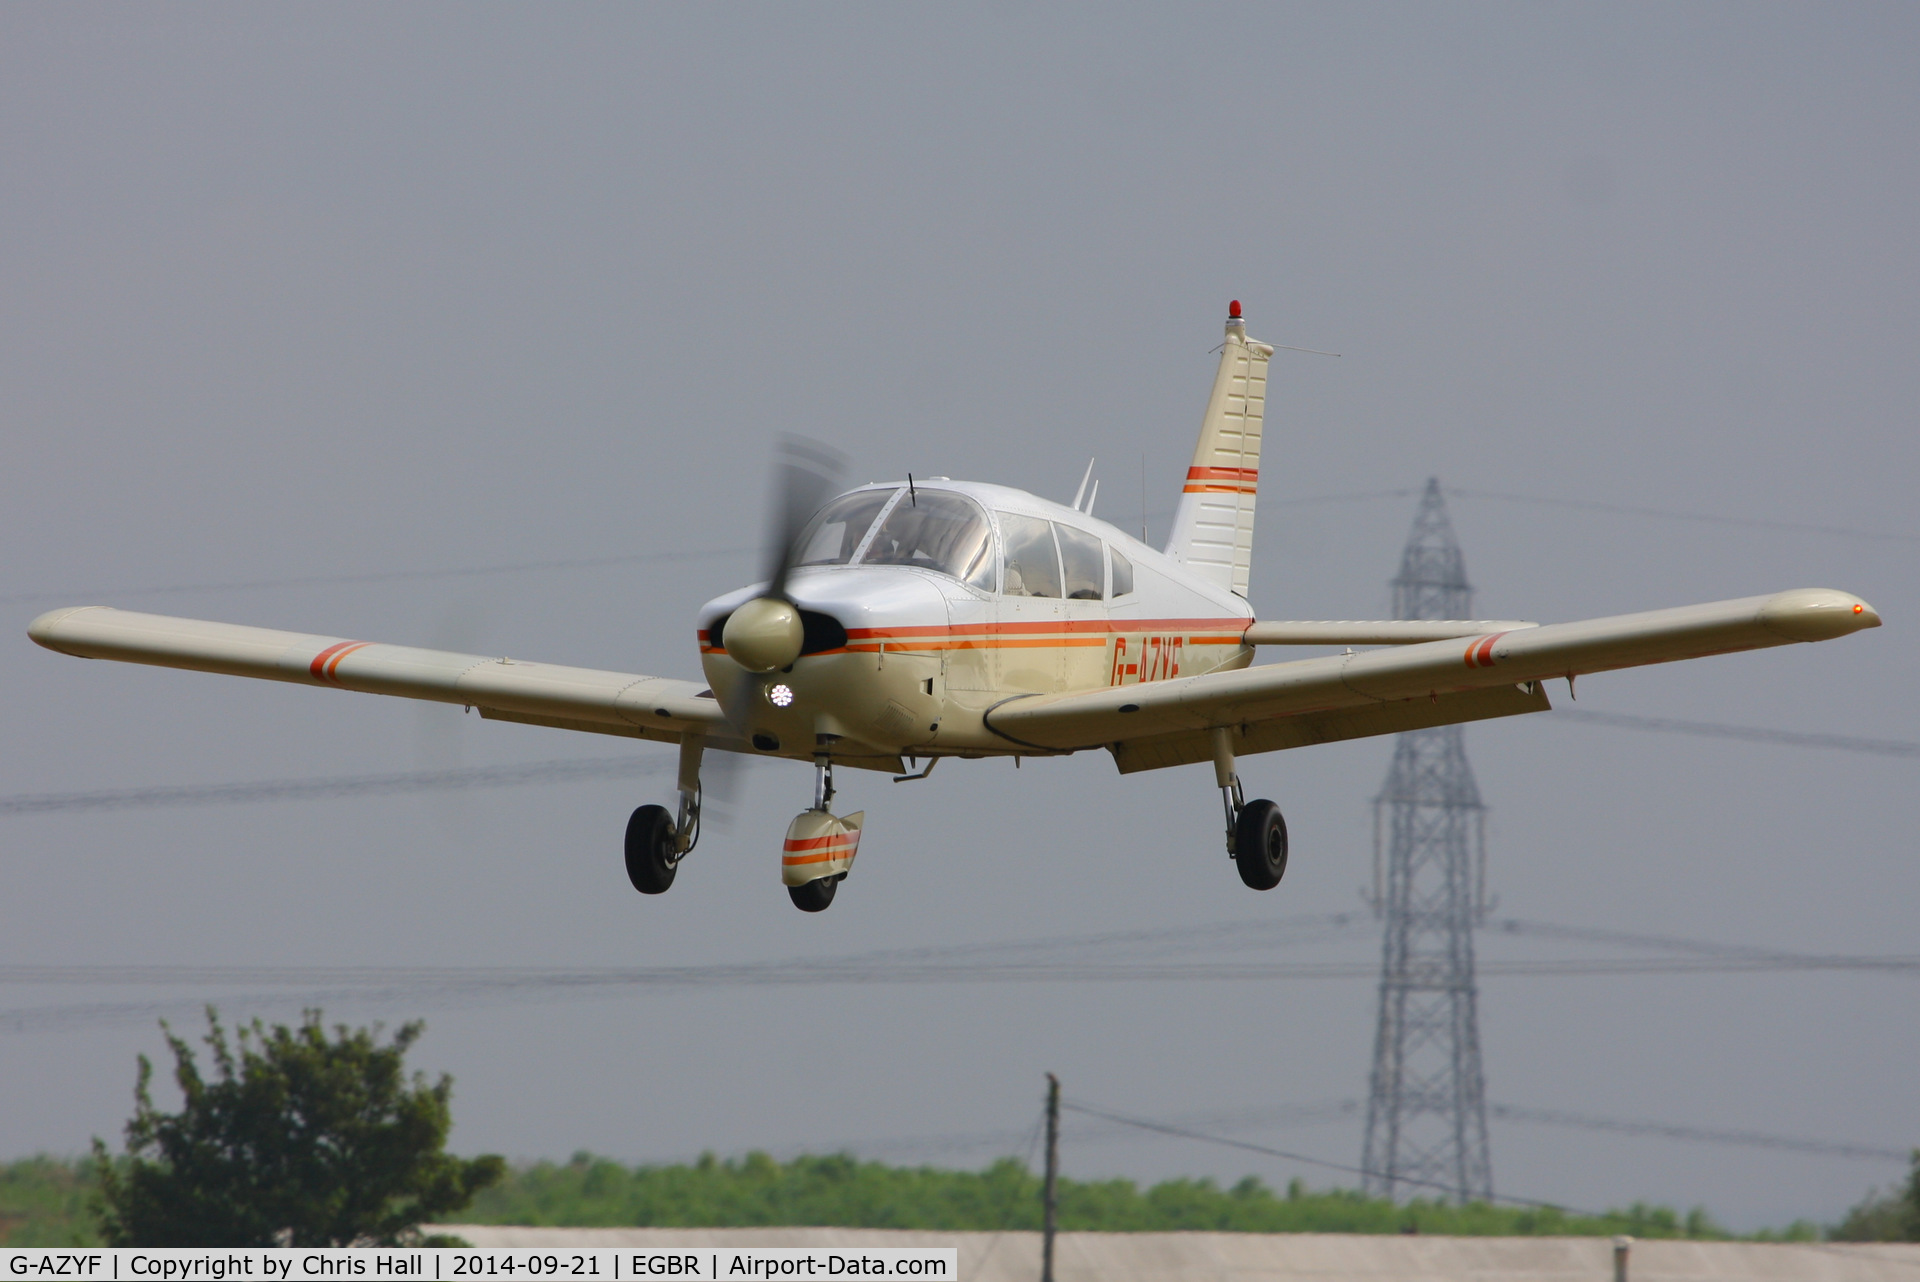 G-AZYF, 1968 Piper PA-28-180 Cherokee C/N 28-5227, at Breighton's Heli Fly-in, 2014